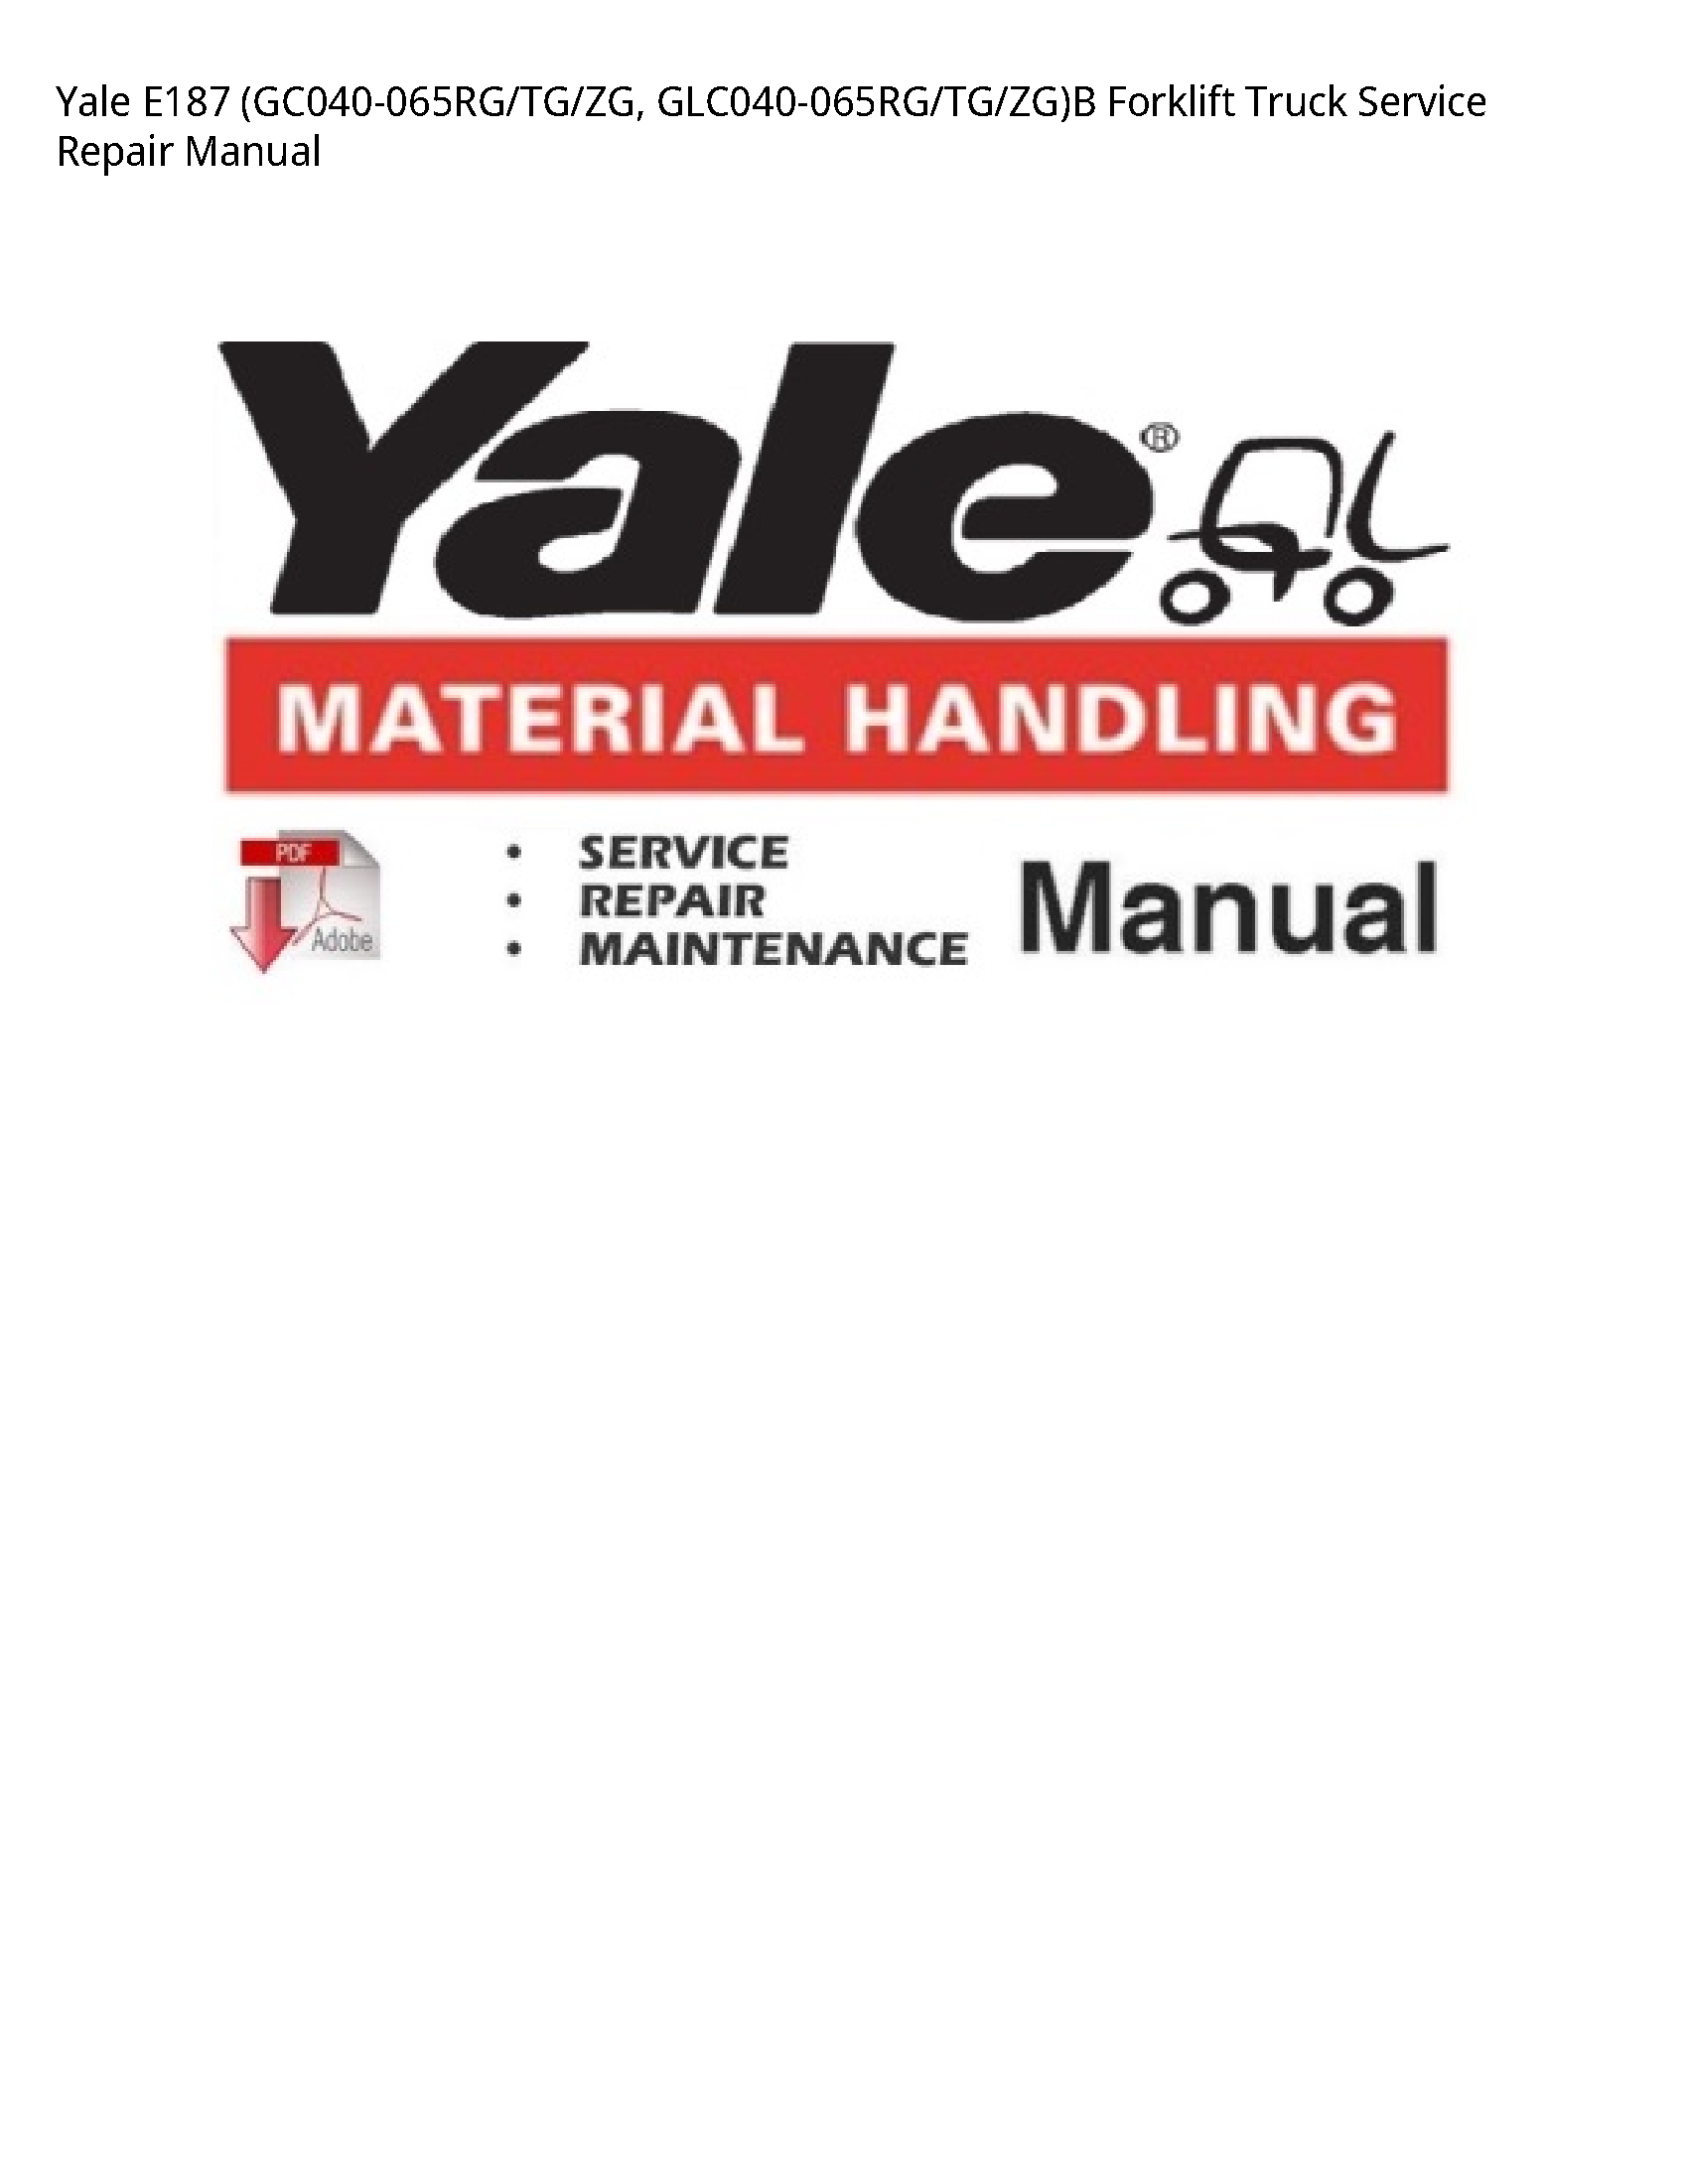 Yale E187 Forklift Truck manual